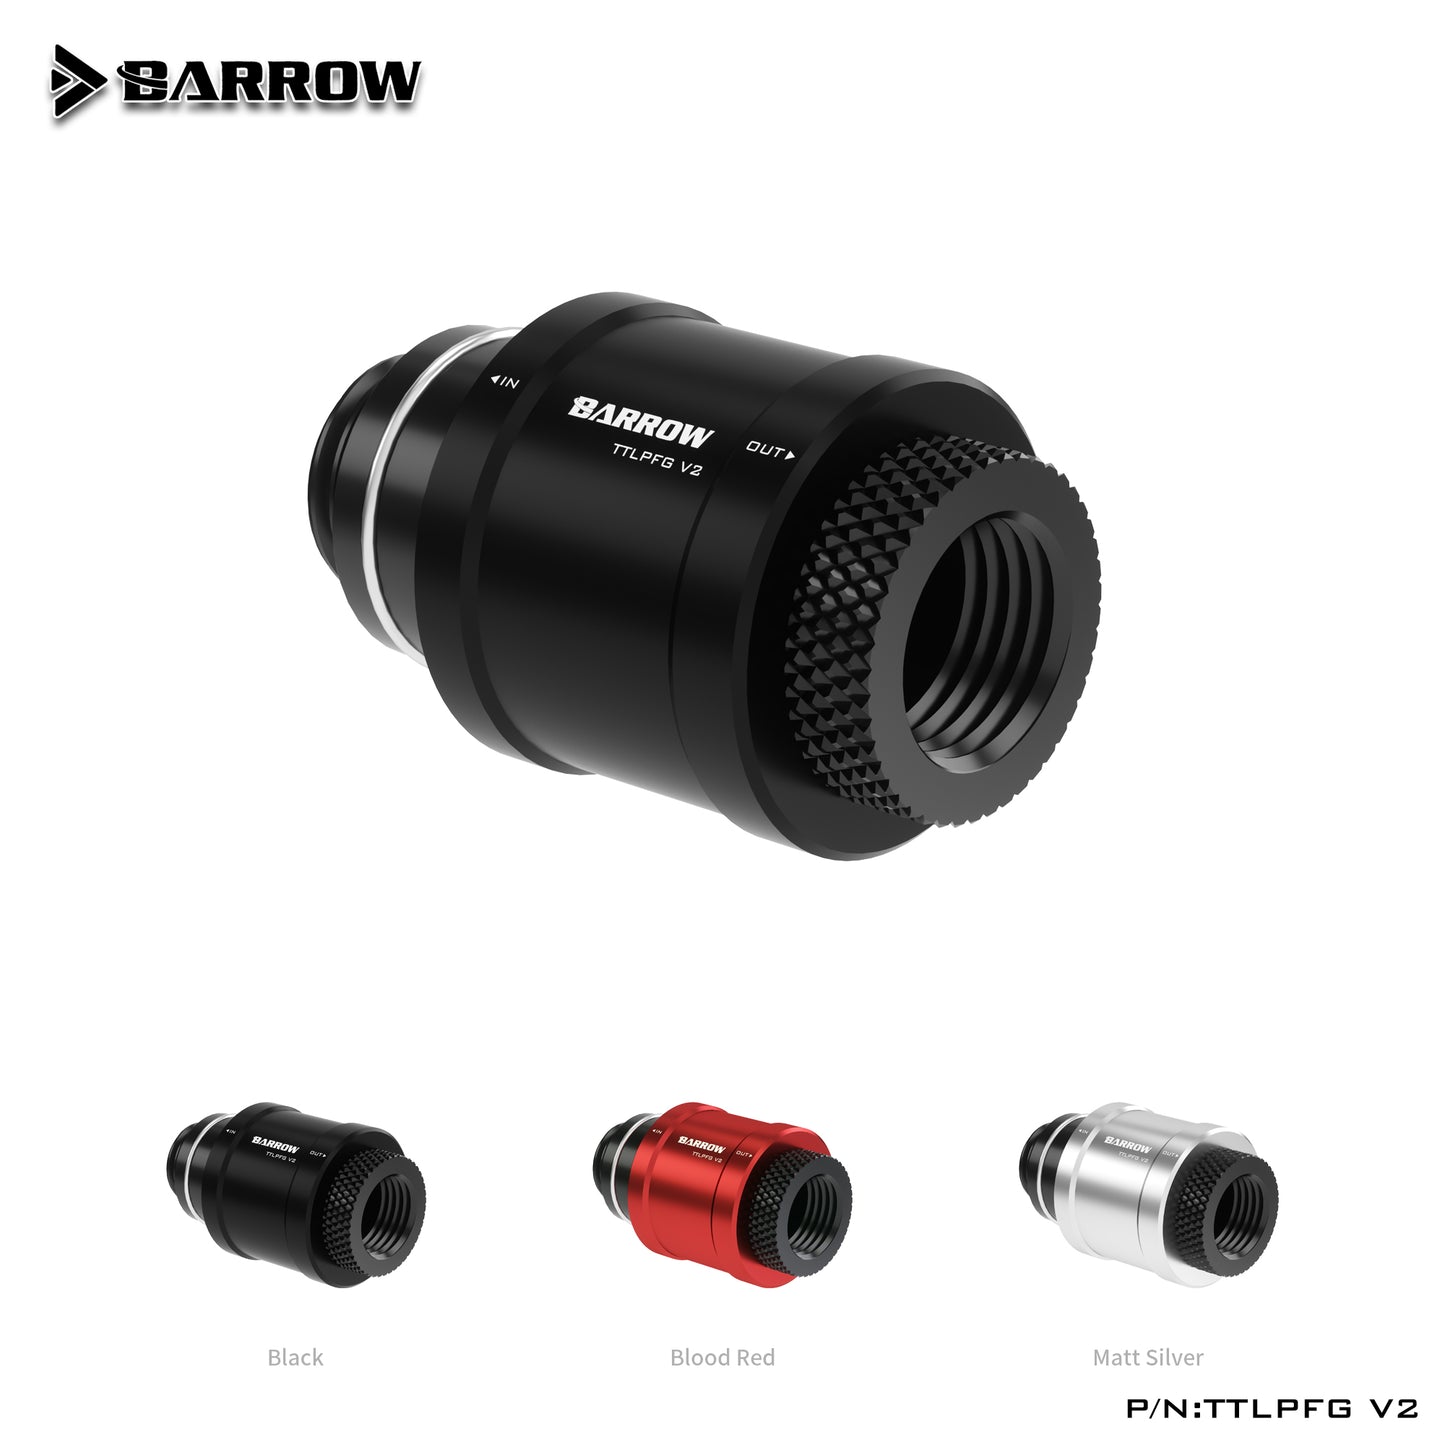 Barrow Male To Female Push Valve, V2 Version G1/4" Valve, Push Handle Fast Switch, Water Cooling Drain Quick Valve, TTLPFG V2